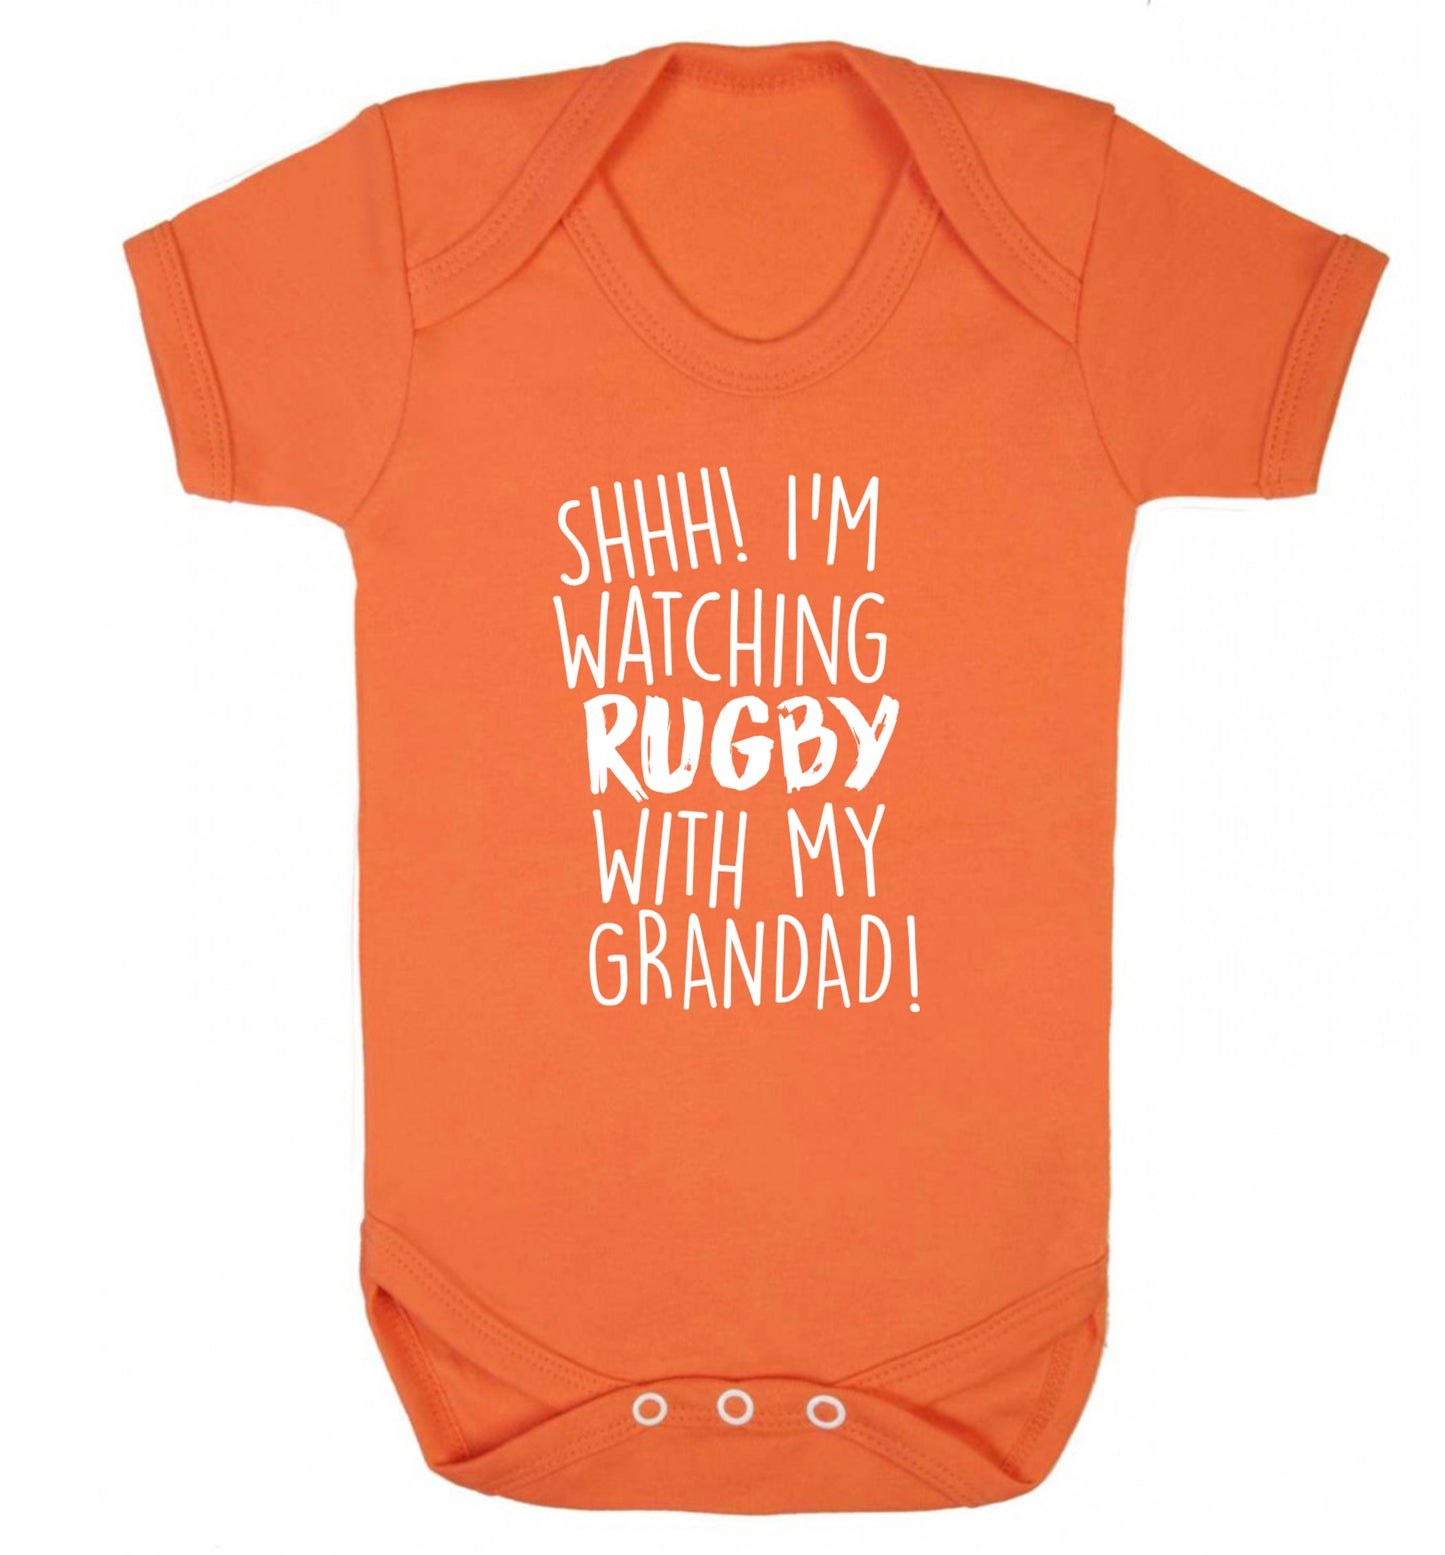 Shh I'm watching rugby with my grandaughter Baby Vest orange 18-24 months